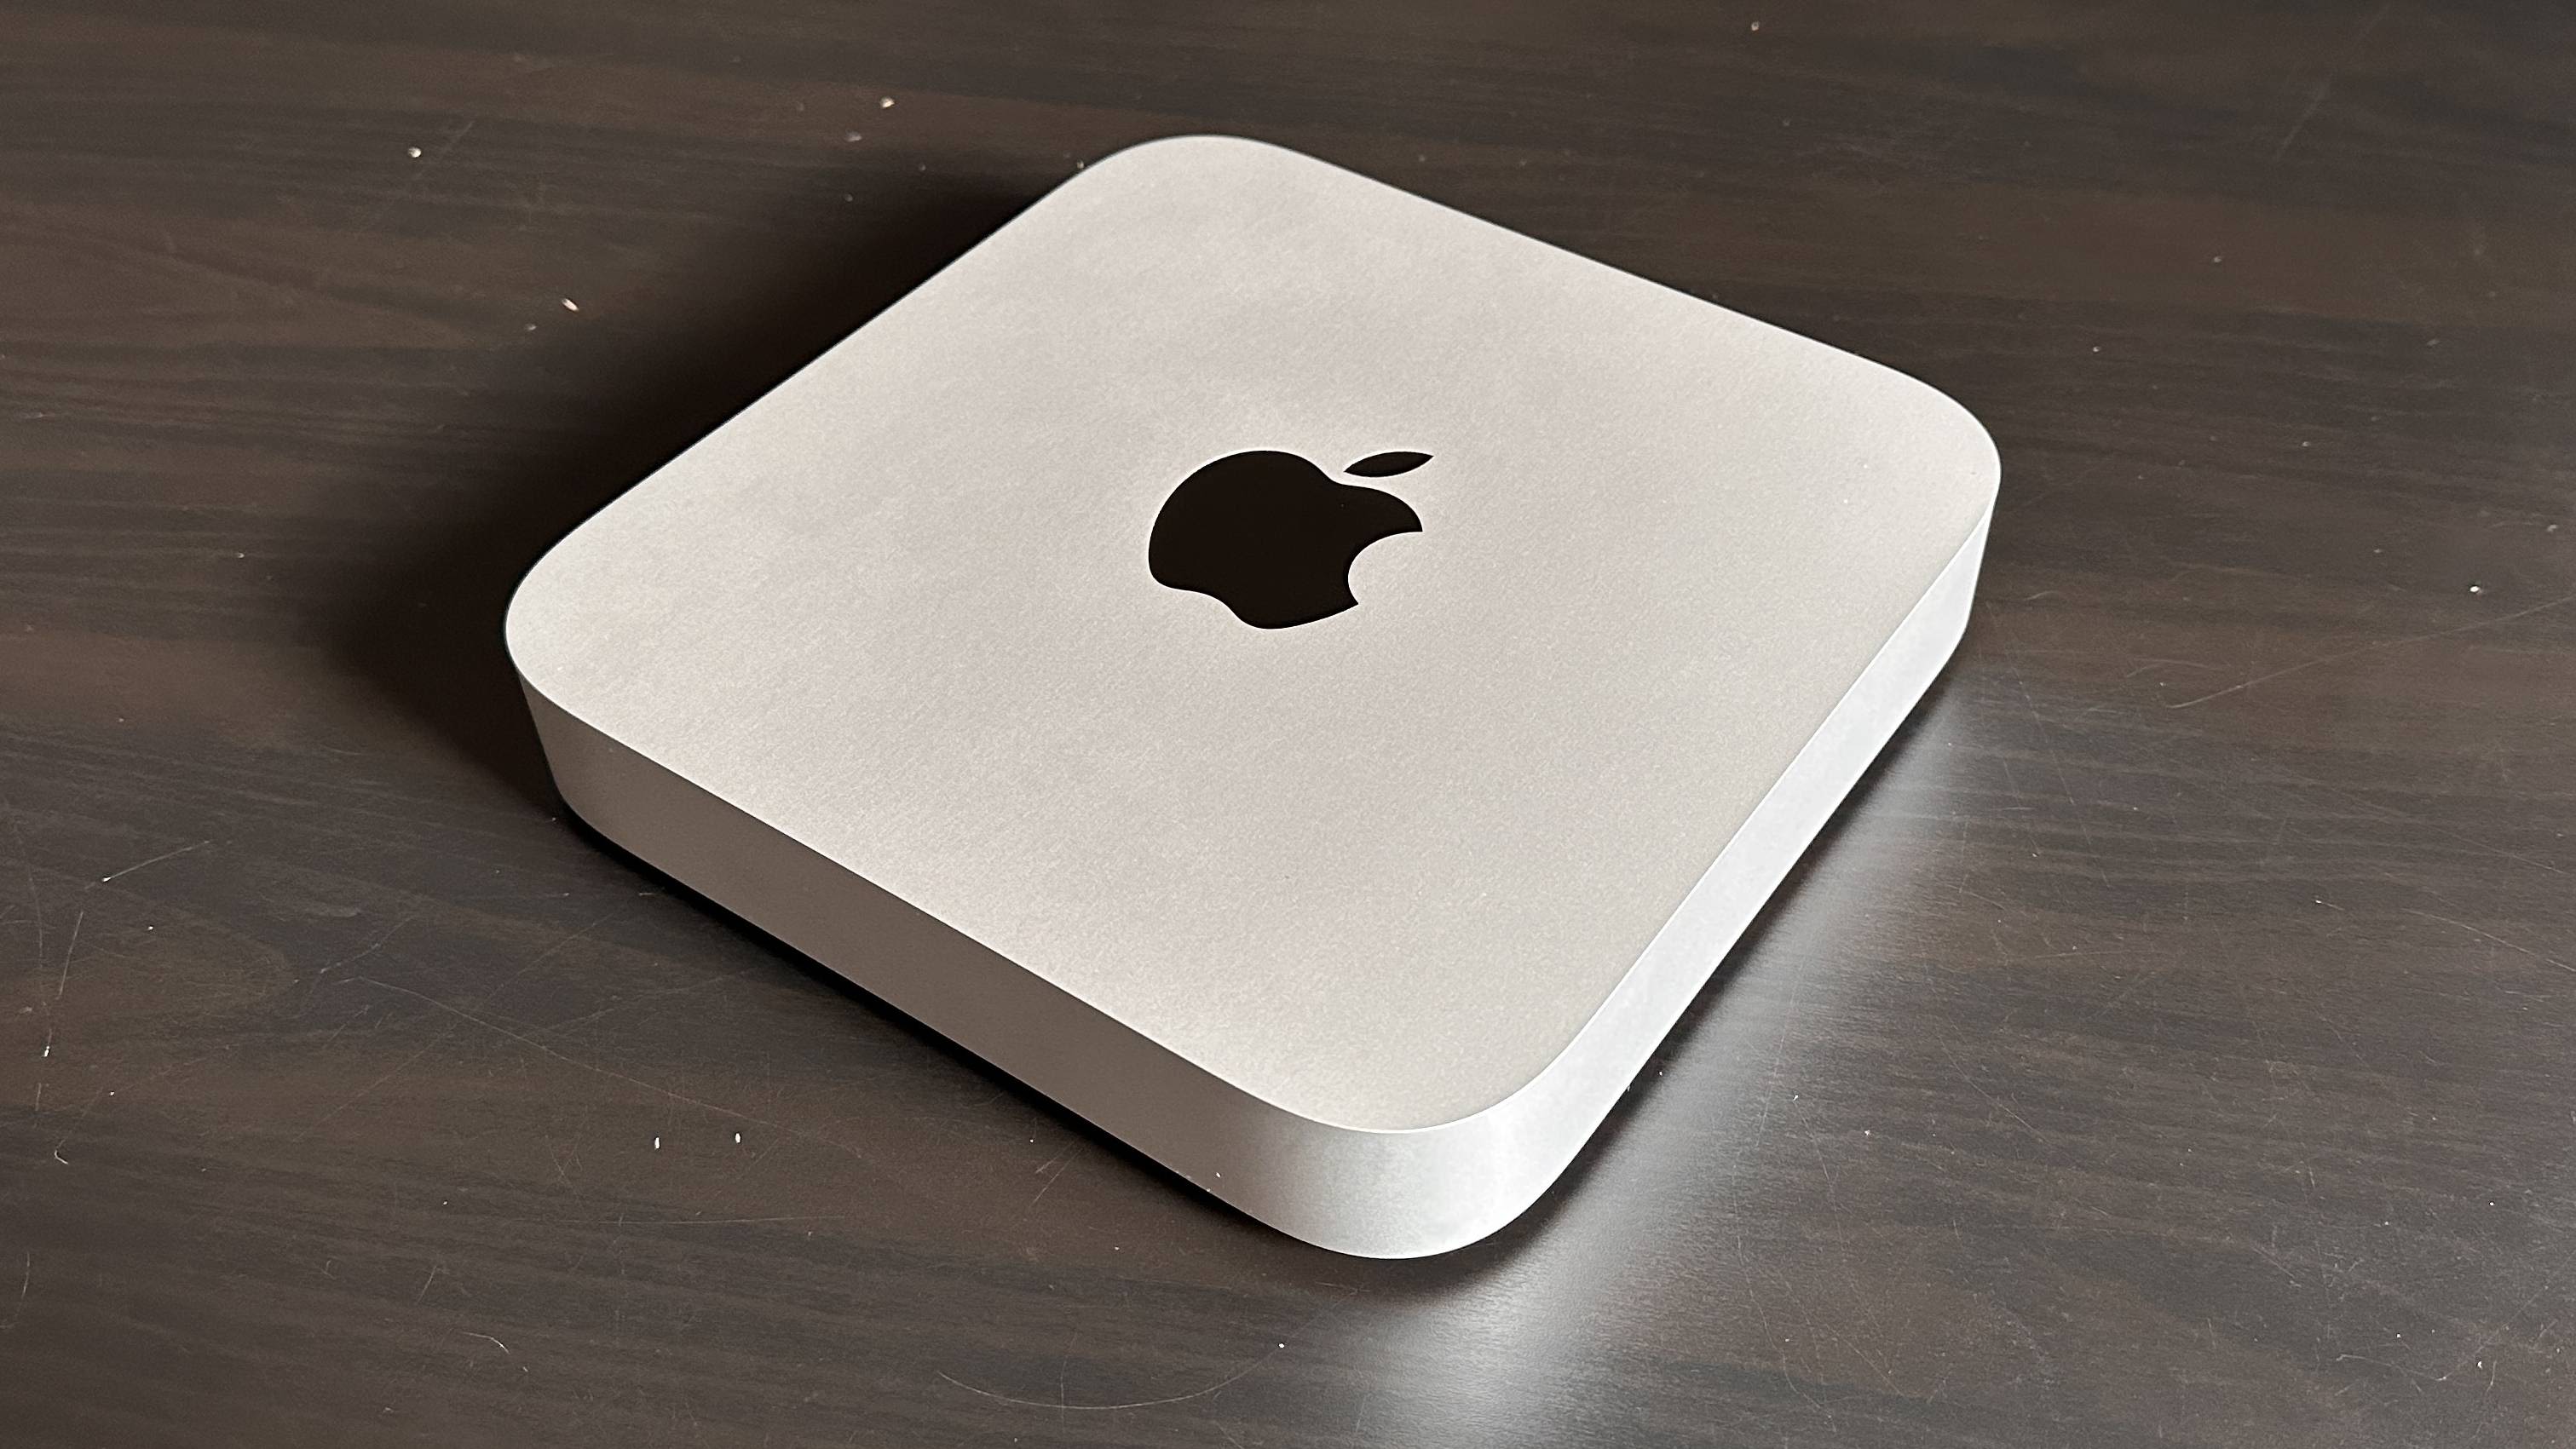 Apple's M2 Pro Mac mini is back to a record-low price at